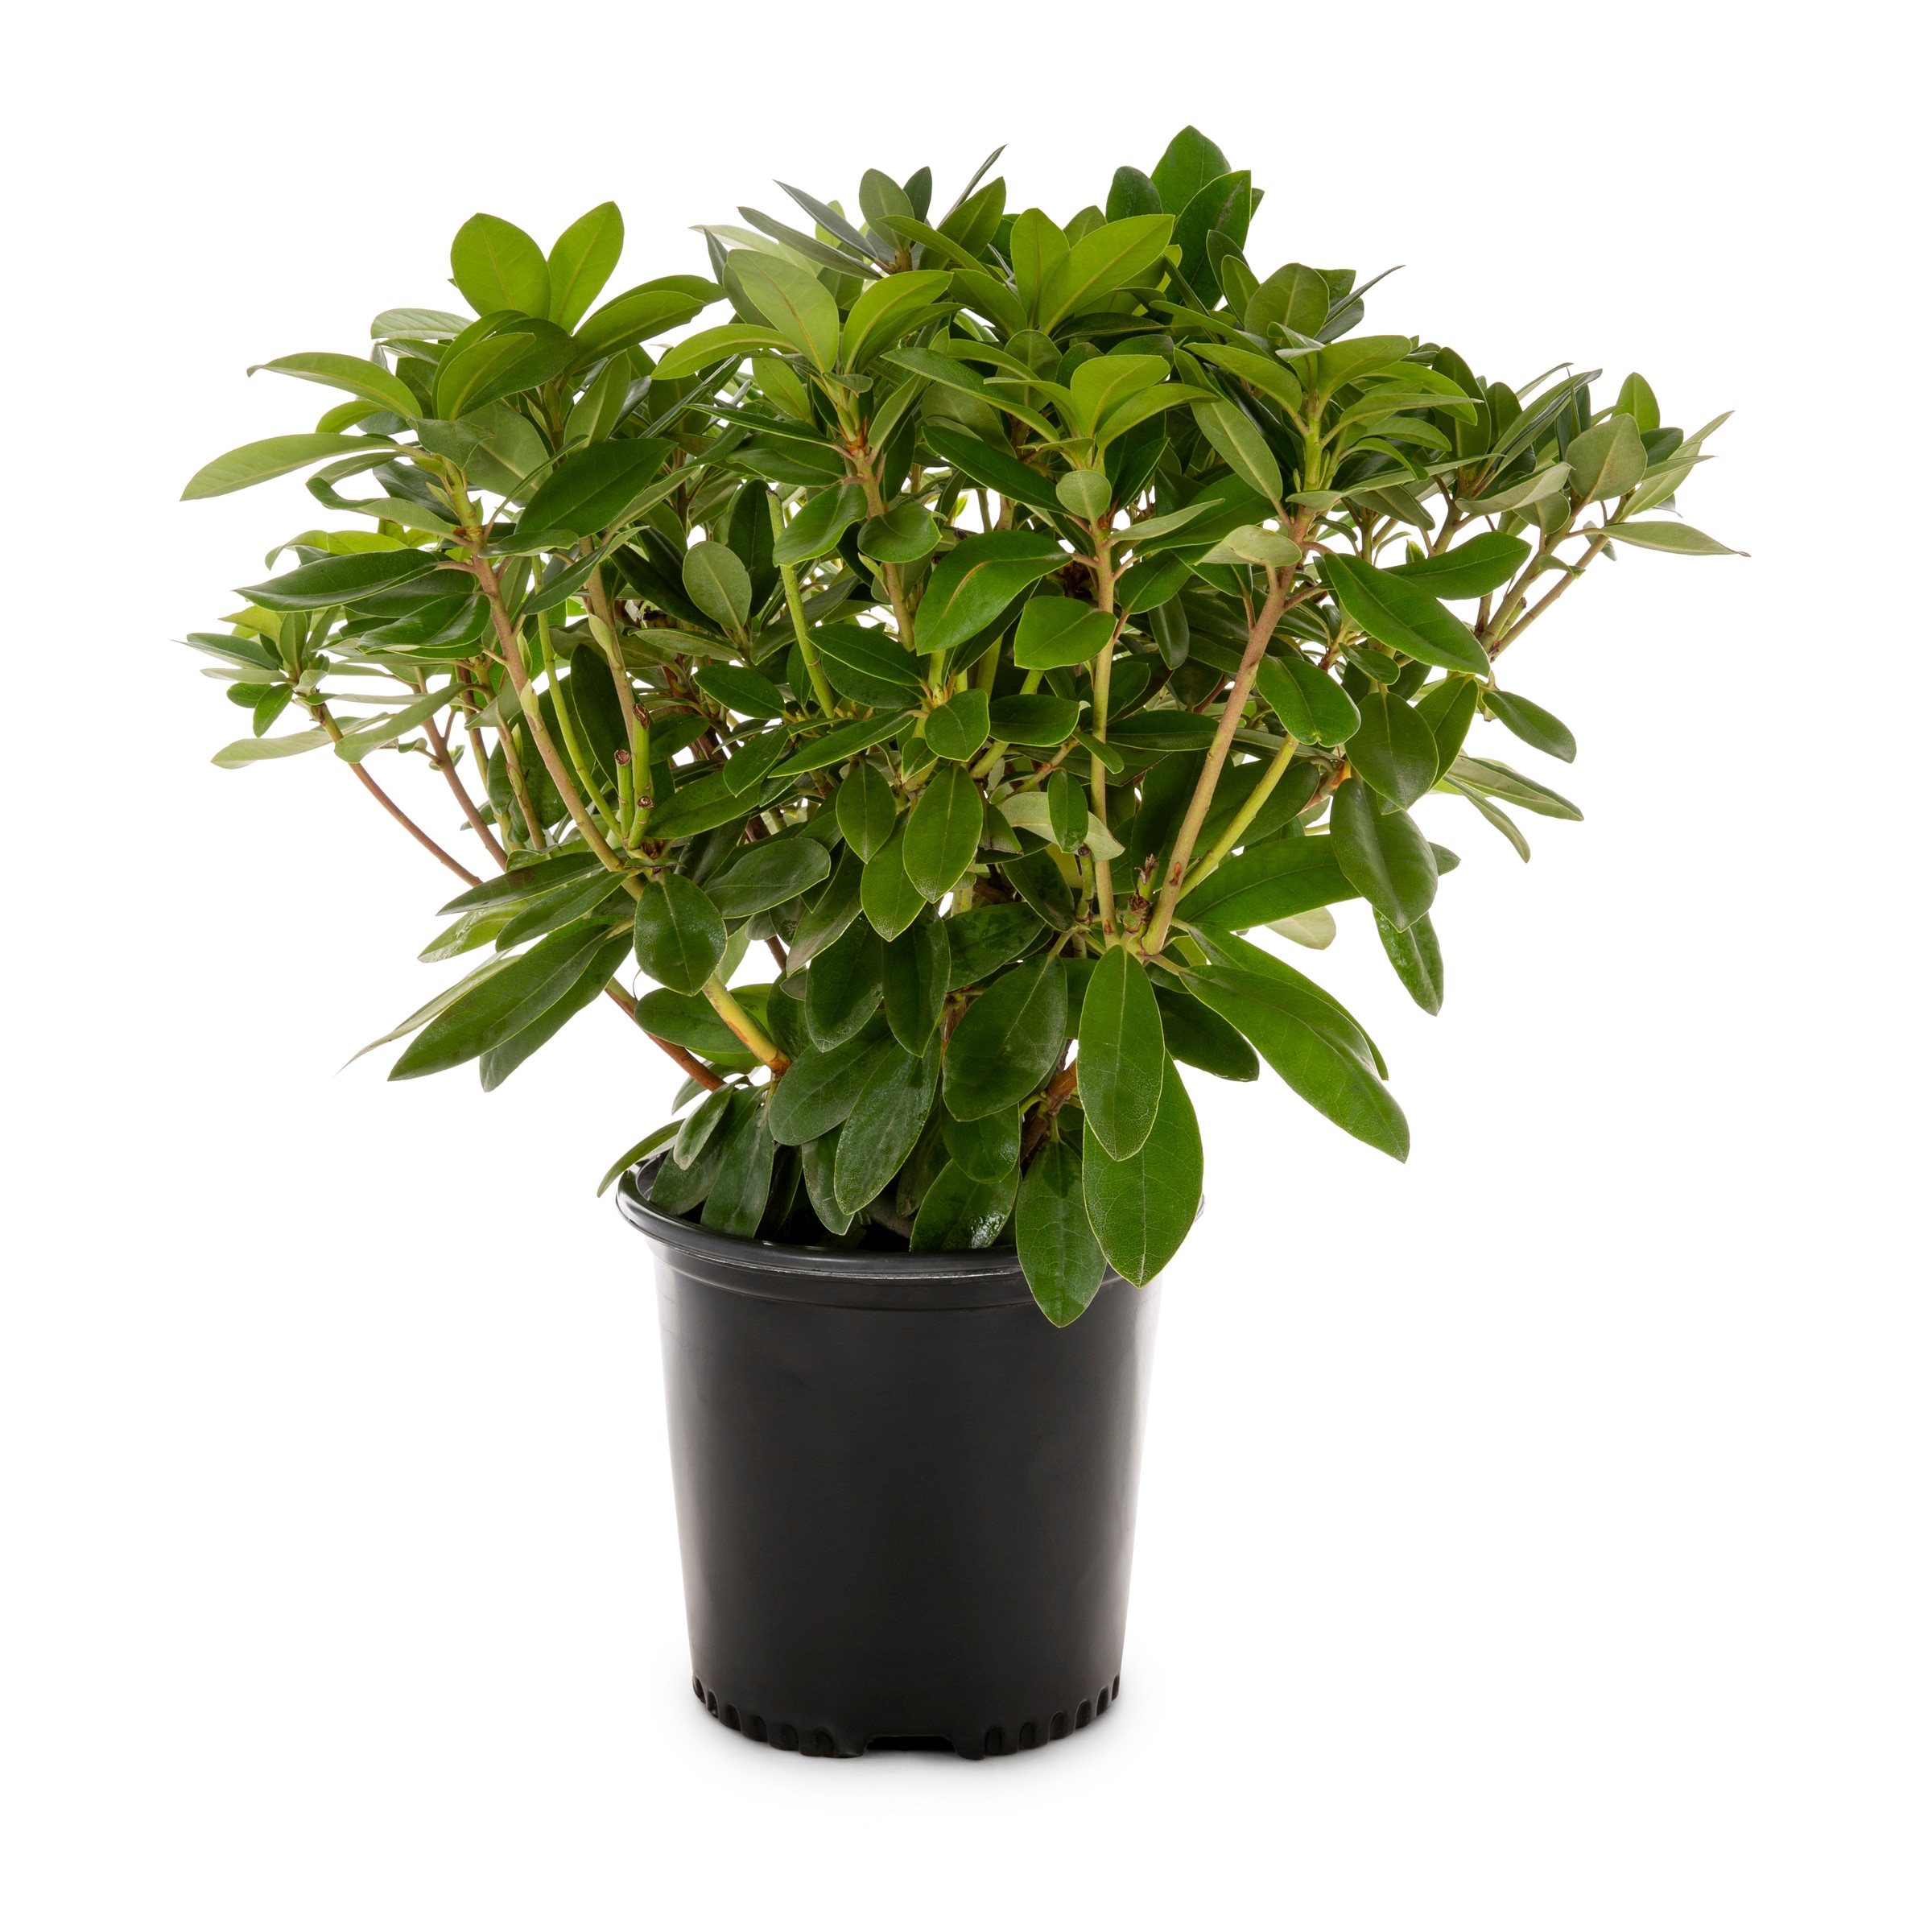 Rhododendron Catawbiense Boursault One Gallon Plant